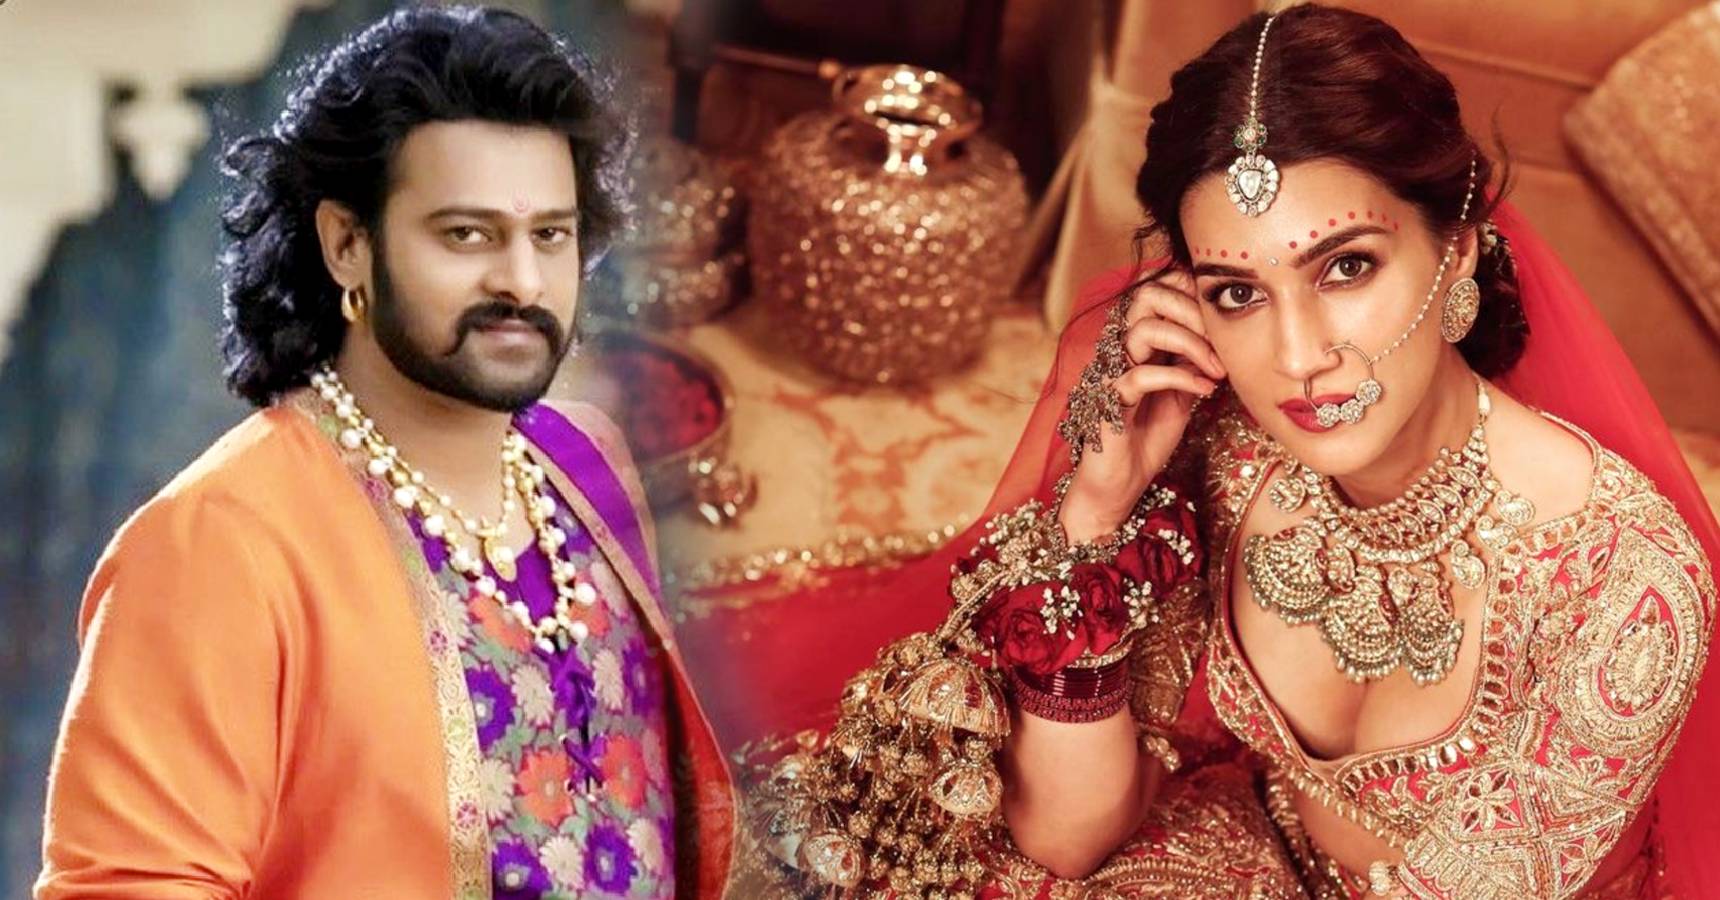 Kriti Sanon opens up about her wedding rumours with Prabhas